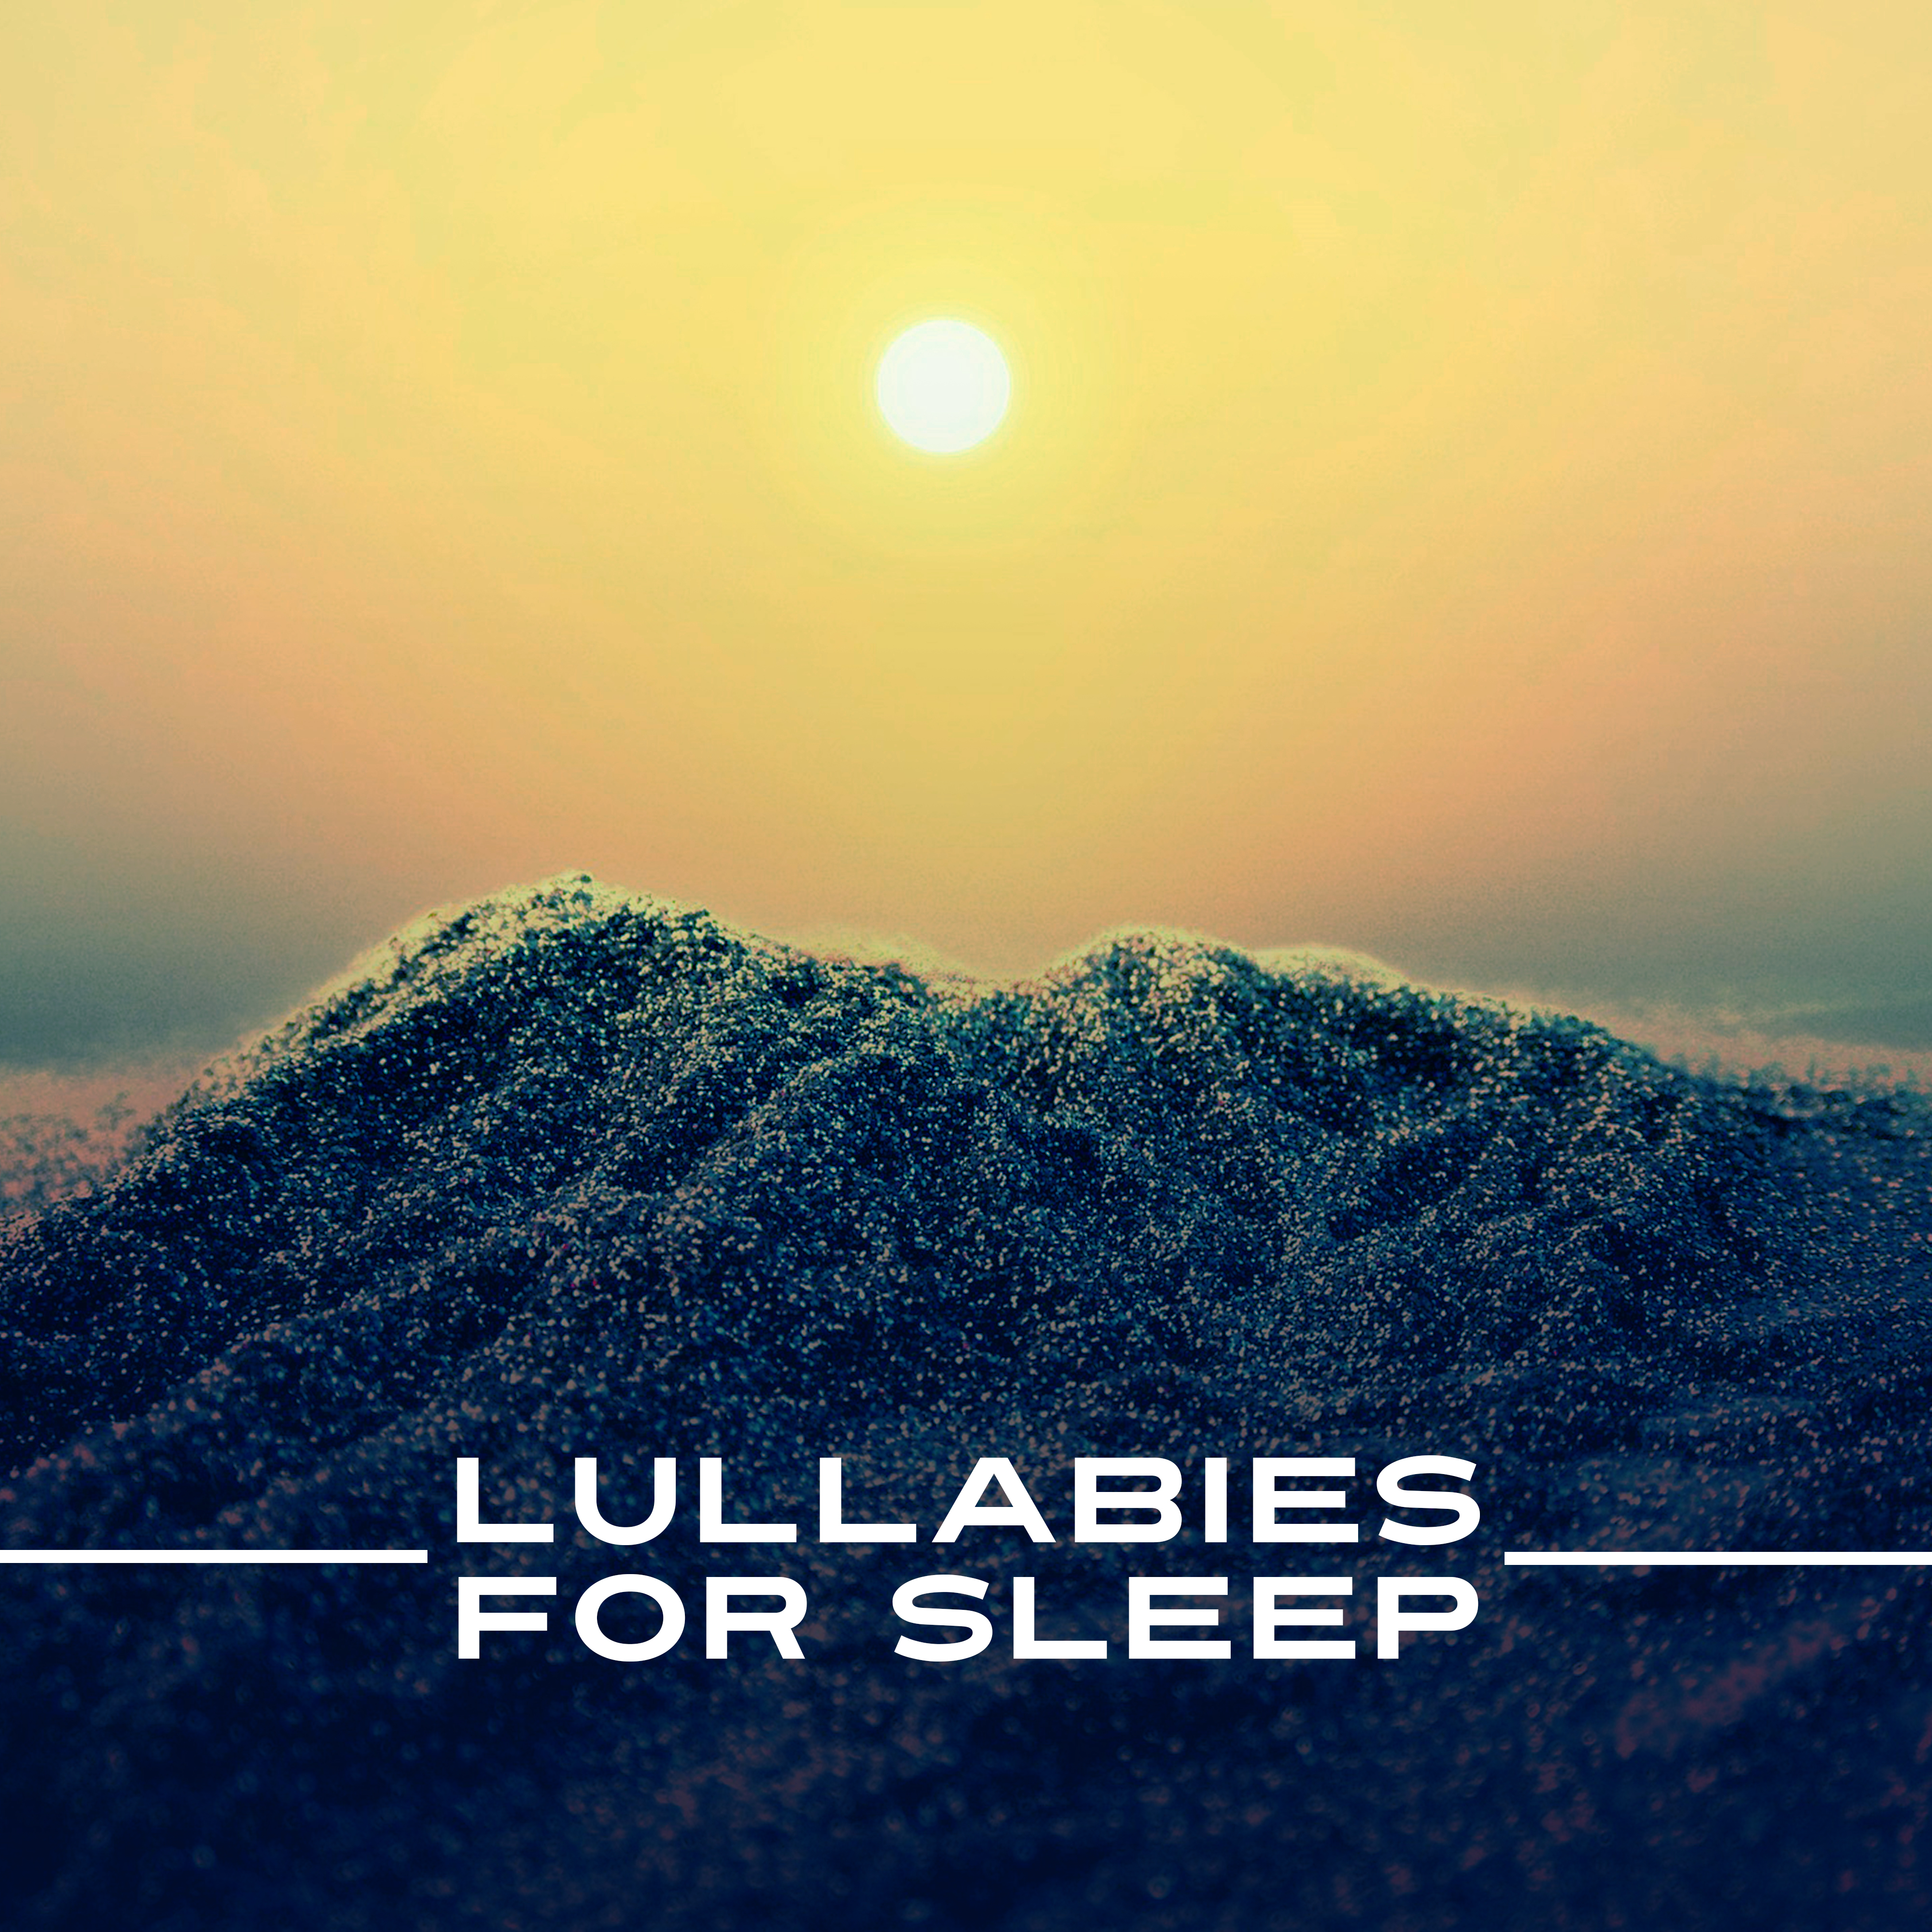 Lullabies for Sleep  Soft Sounds of Nature, New Age, Relaxation, Music for Sleep, Helpful for Falling Asleep